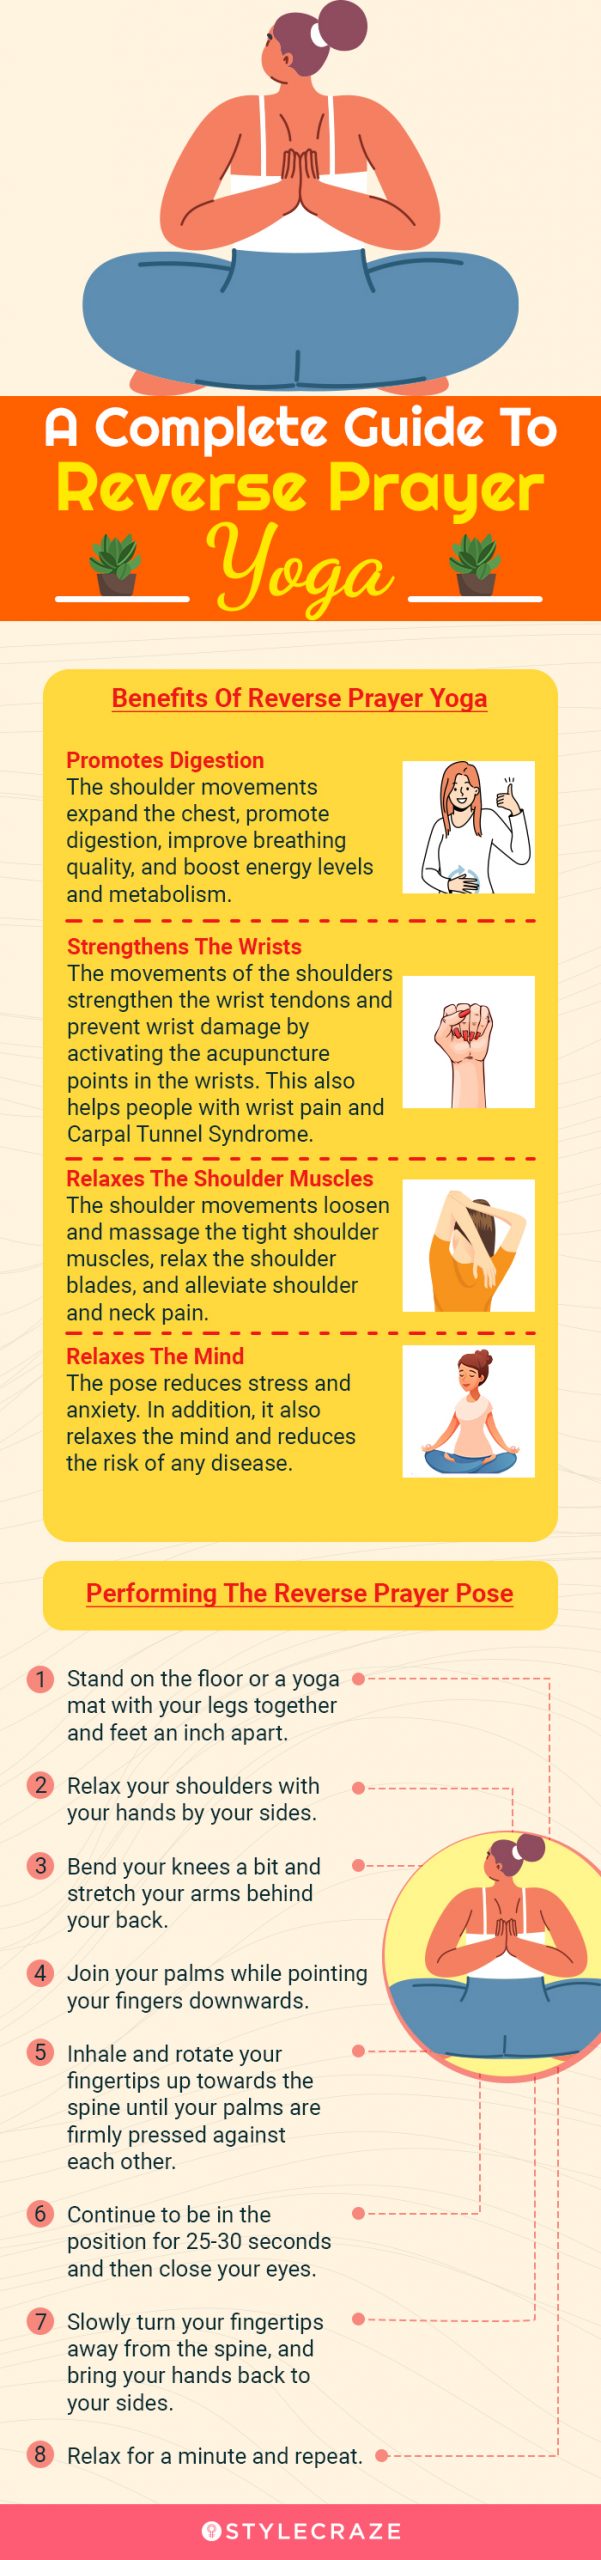 a complete guide to reverse prayer yoga (infographic)